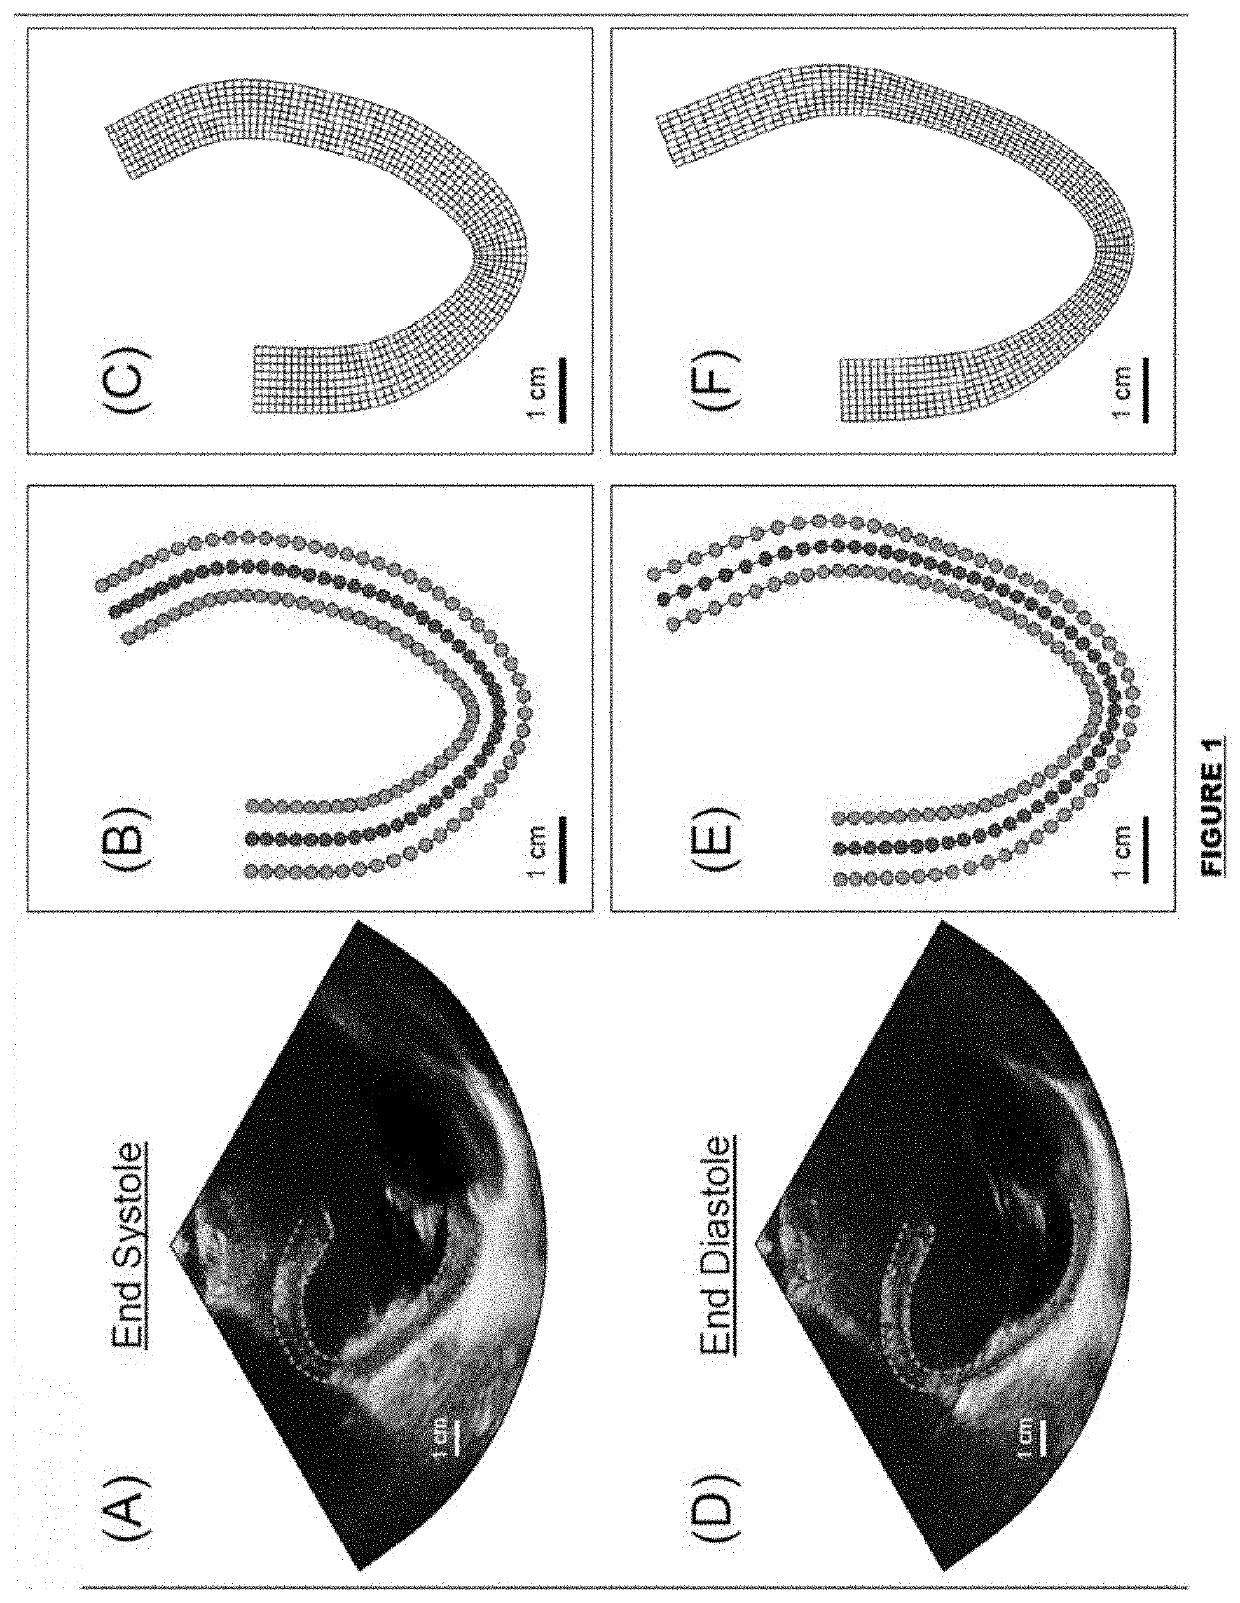 Non-invasive estimation of the mechanical properties of the heart